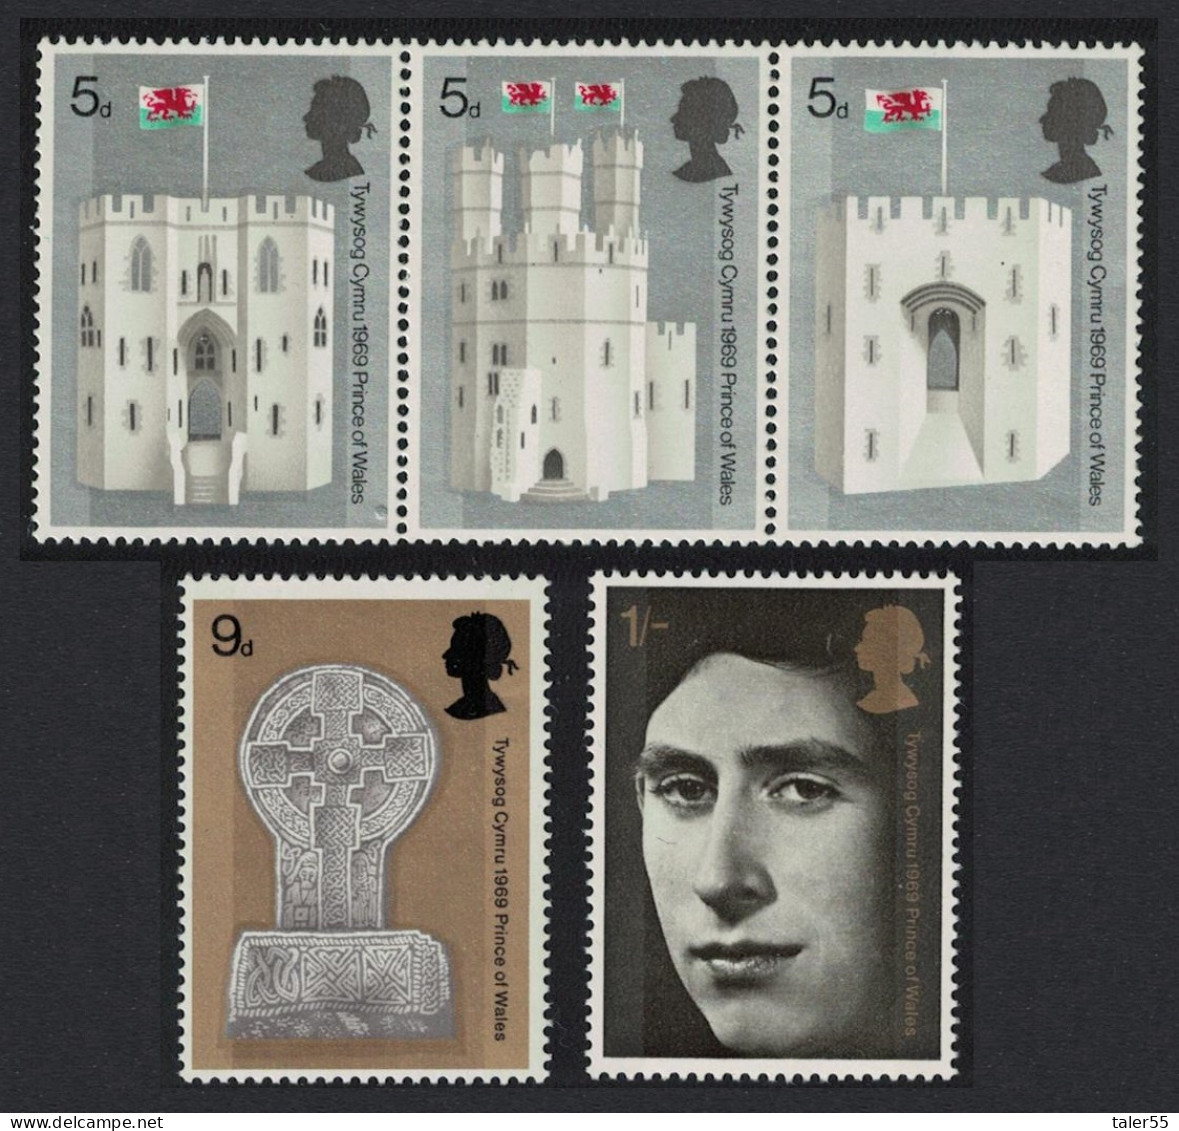 Great Britain Investiture Of The Prince Of Wales 5v 1969 MNH SG#802-806 Sc#597-599 - Nuevos